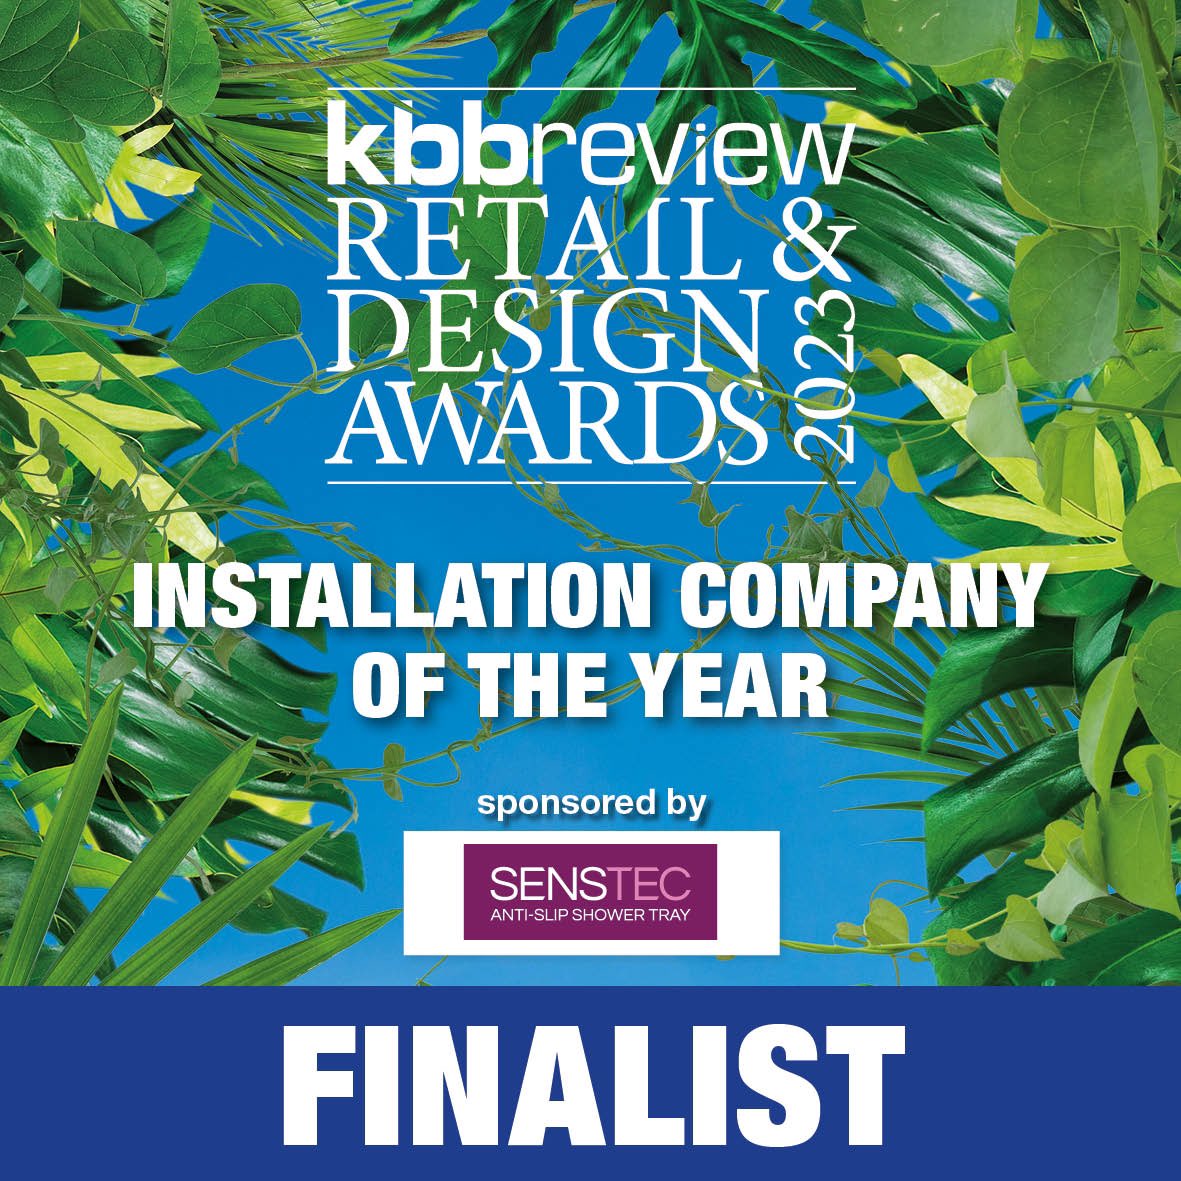 Super excited to be shortlisted for the 2023 @kbbreview awards 👏👏

Fingers crossed 🤞 

Massive thank you to kbbreview and to @SENSTEC_ for sponsoring this category 🙏
.
.
.
#awards #dundee #installation #kbb #kitchens #bathrooms #installers